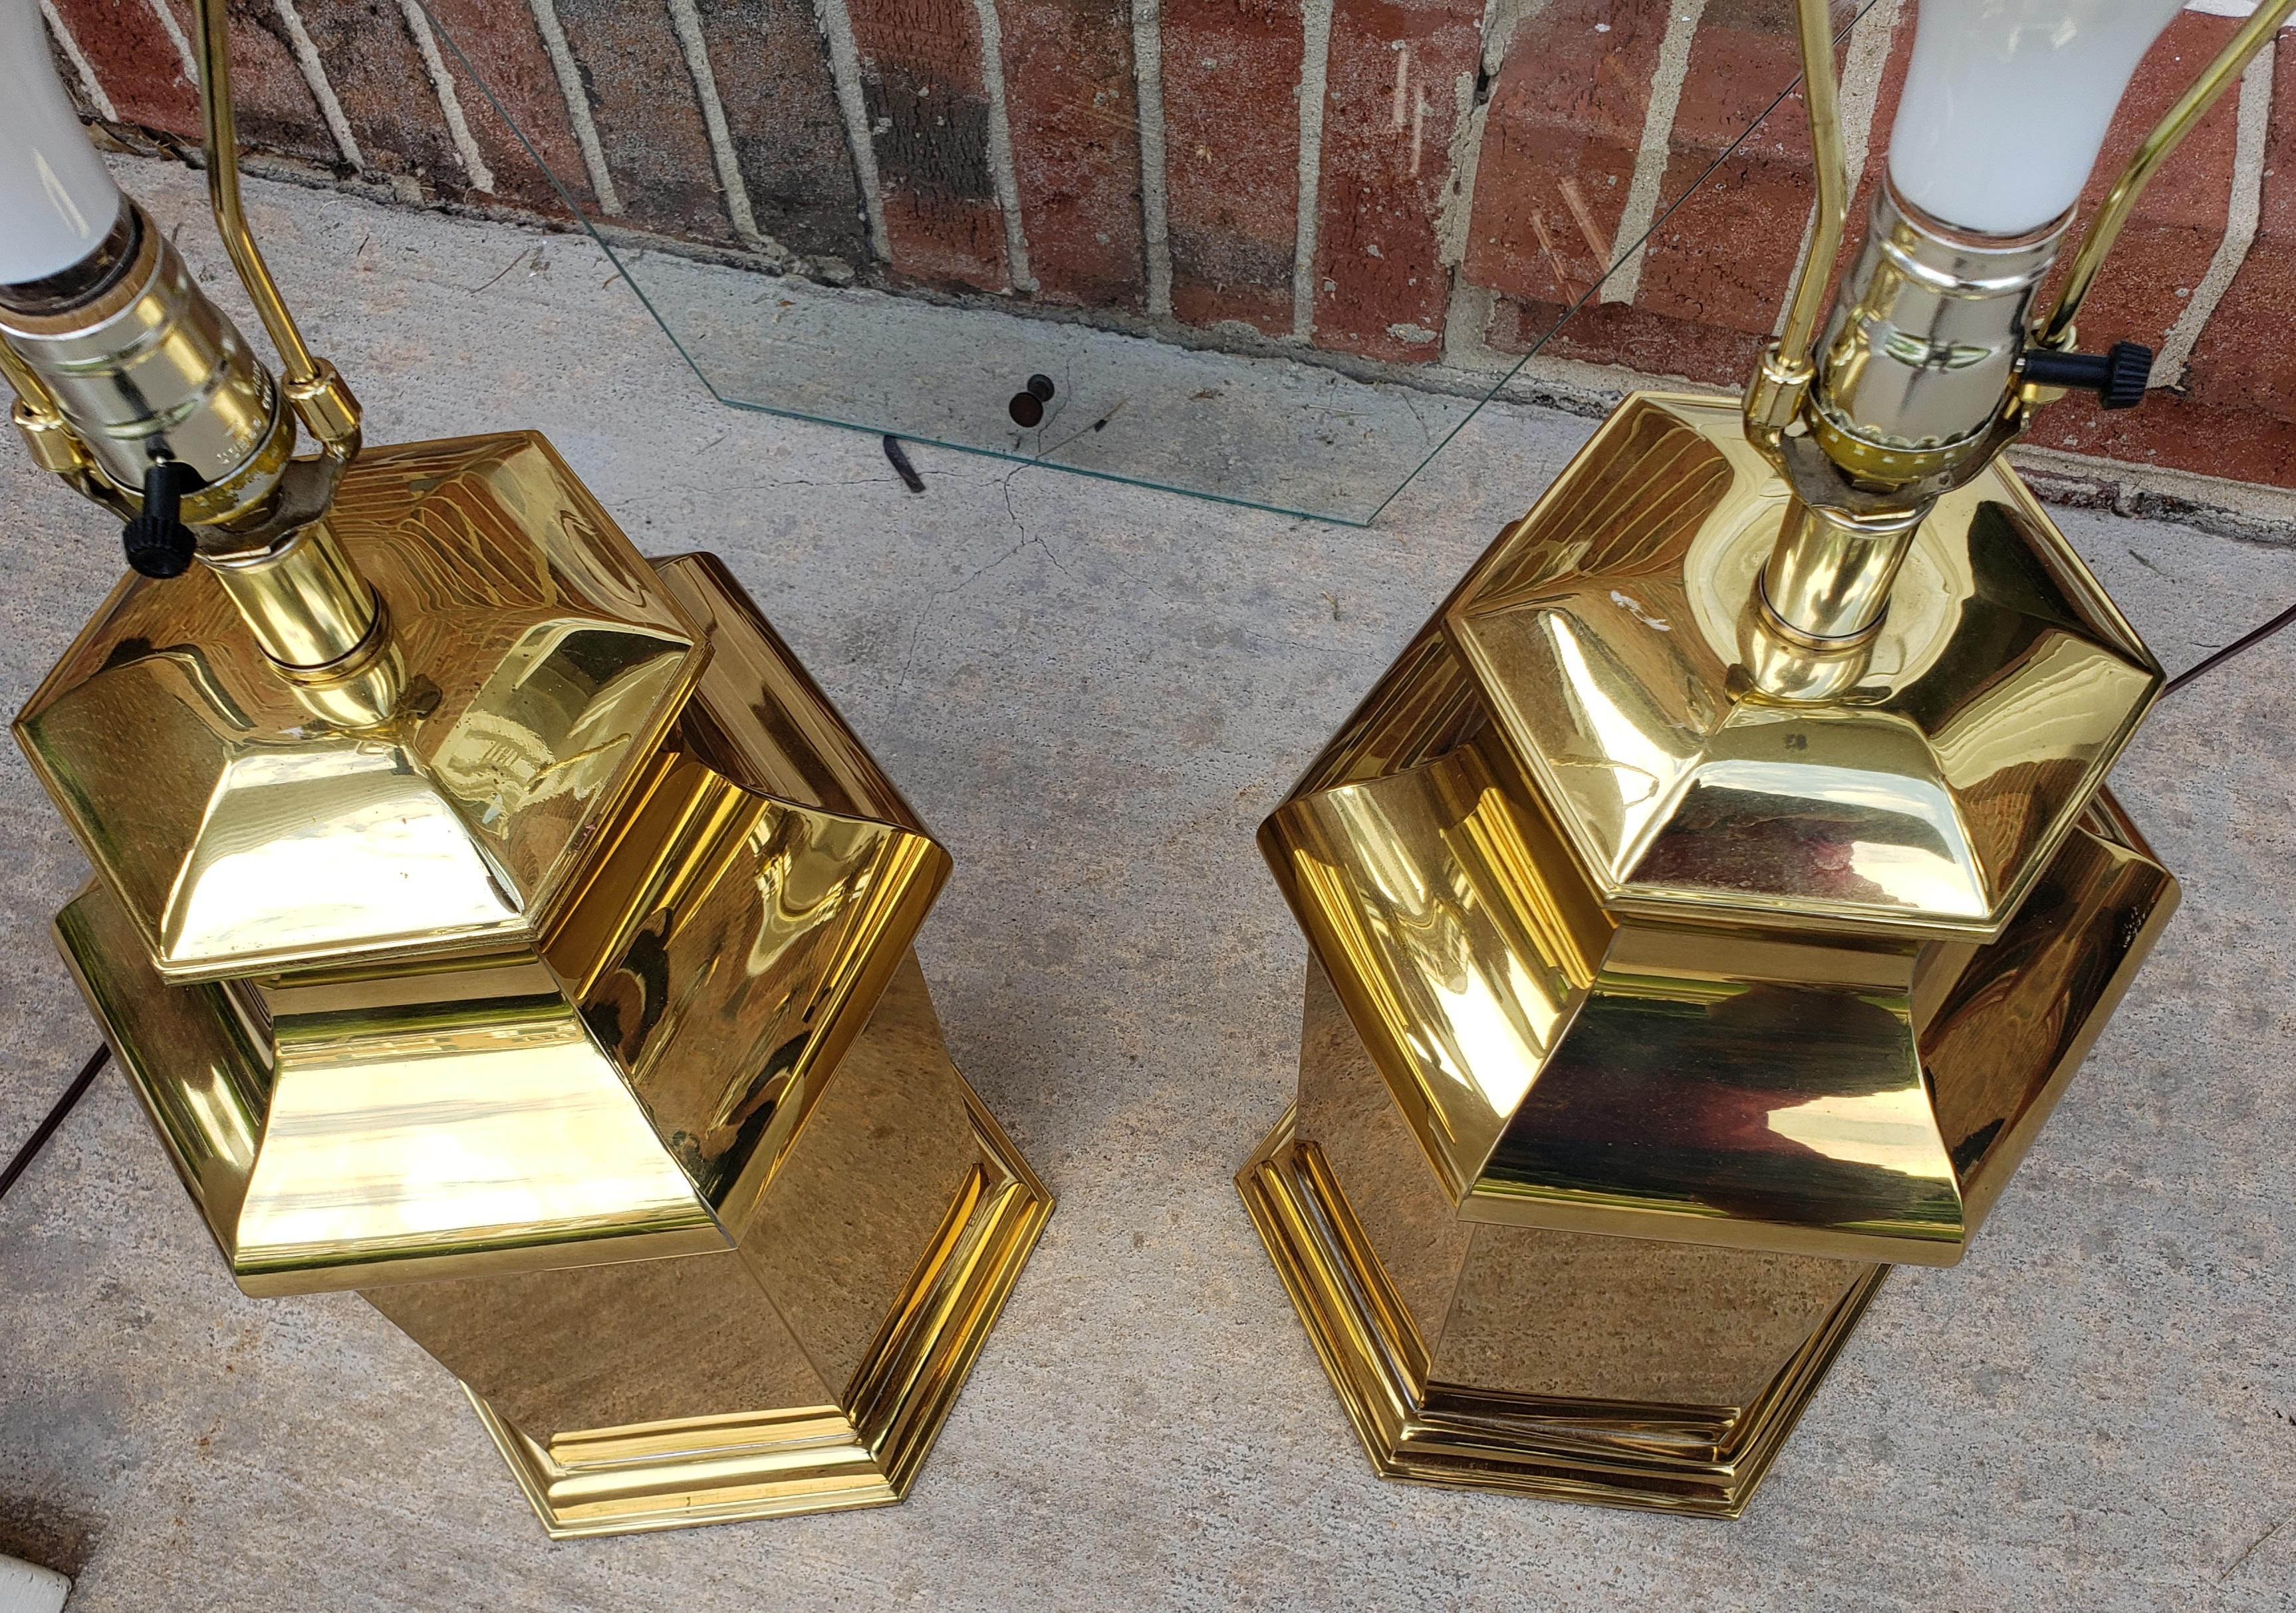 A pair of 1980s Modern Polished Brass Table Lamps in good vintage condition.
Measure 8.5